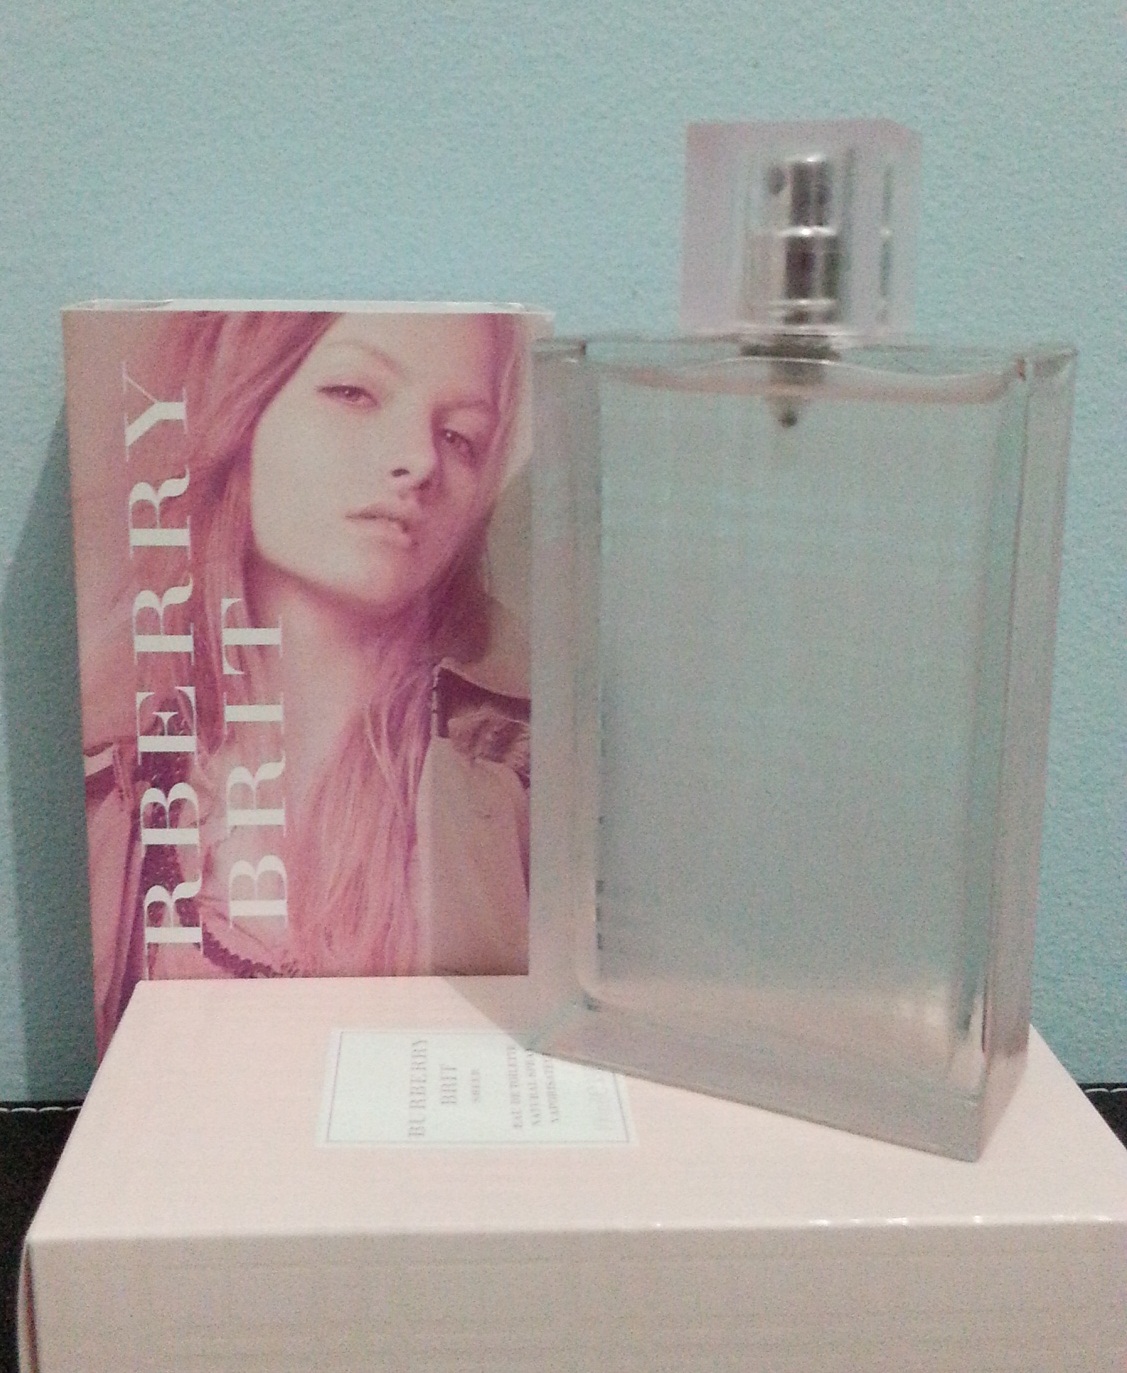 burberry brit sheer for her review